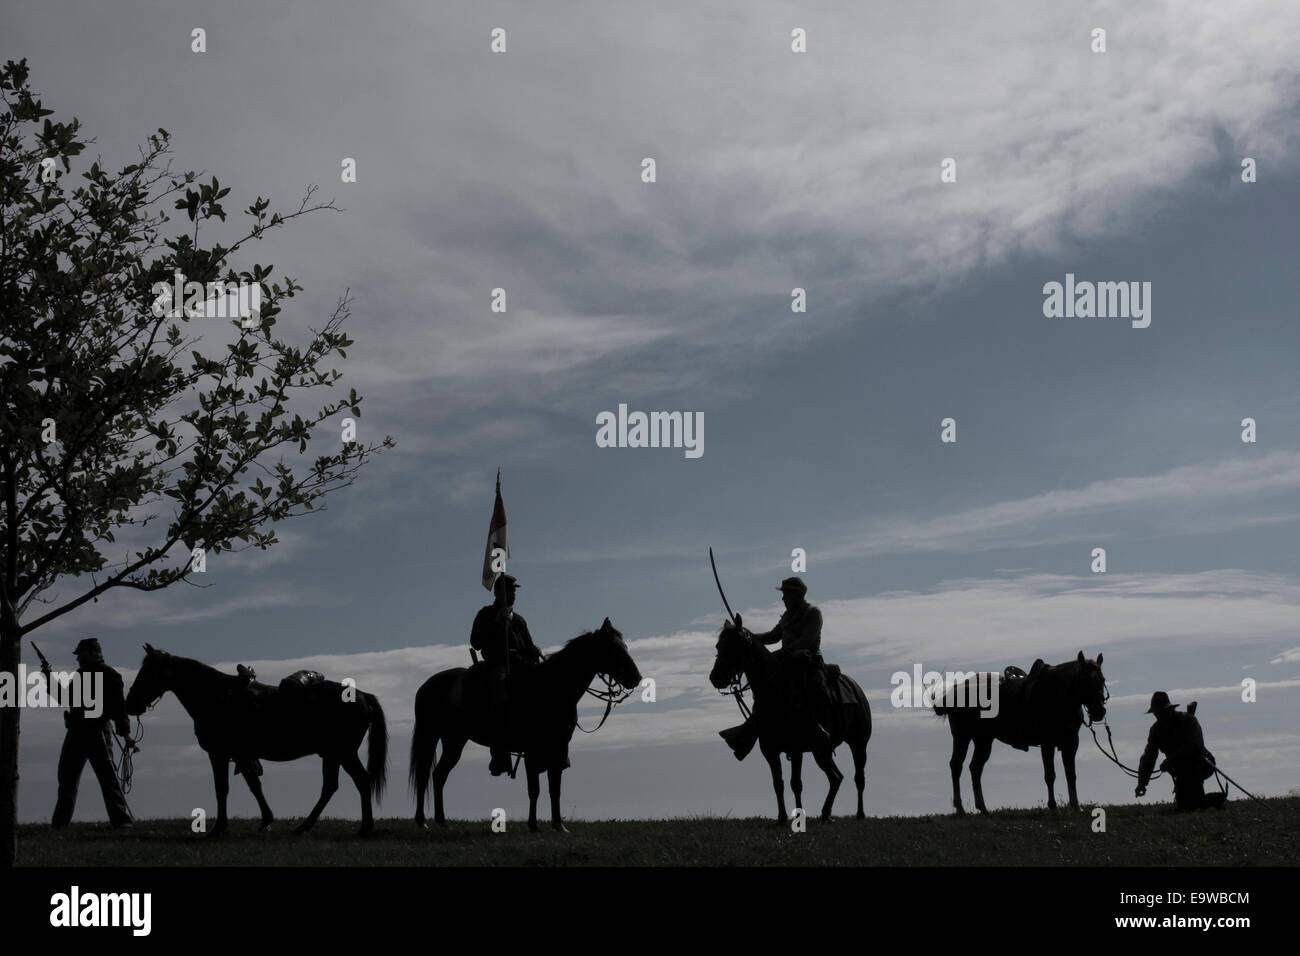 Civil War soldiers silhouette Stock Photo